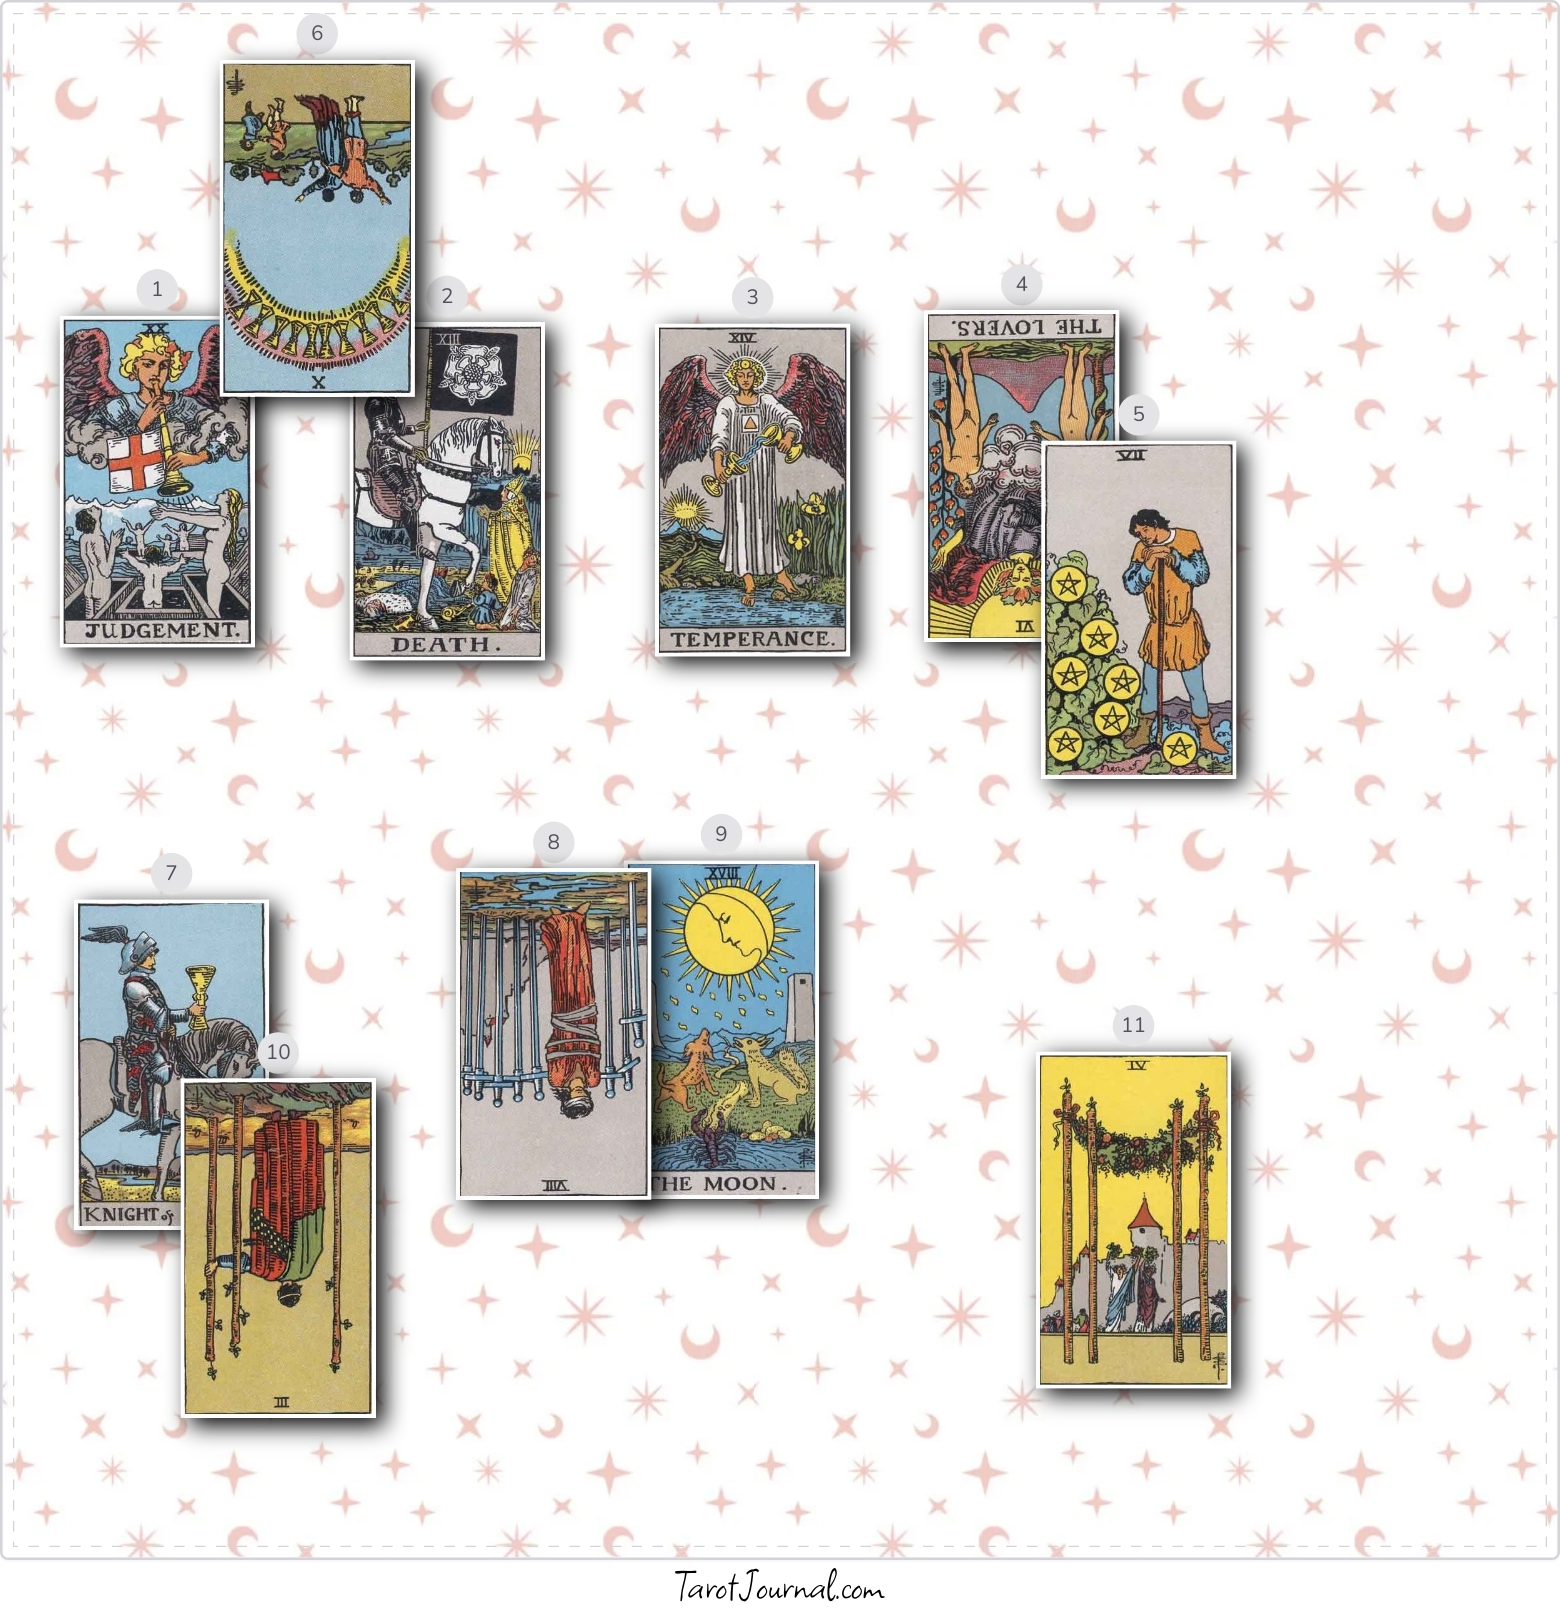 why do i get mixed answers on the speed of incoming opportunities - tarot reading by straycards